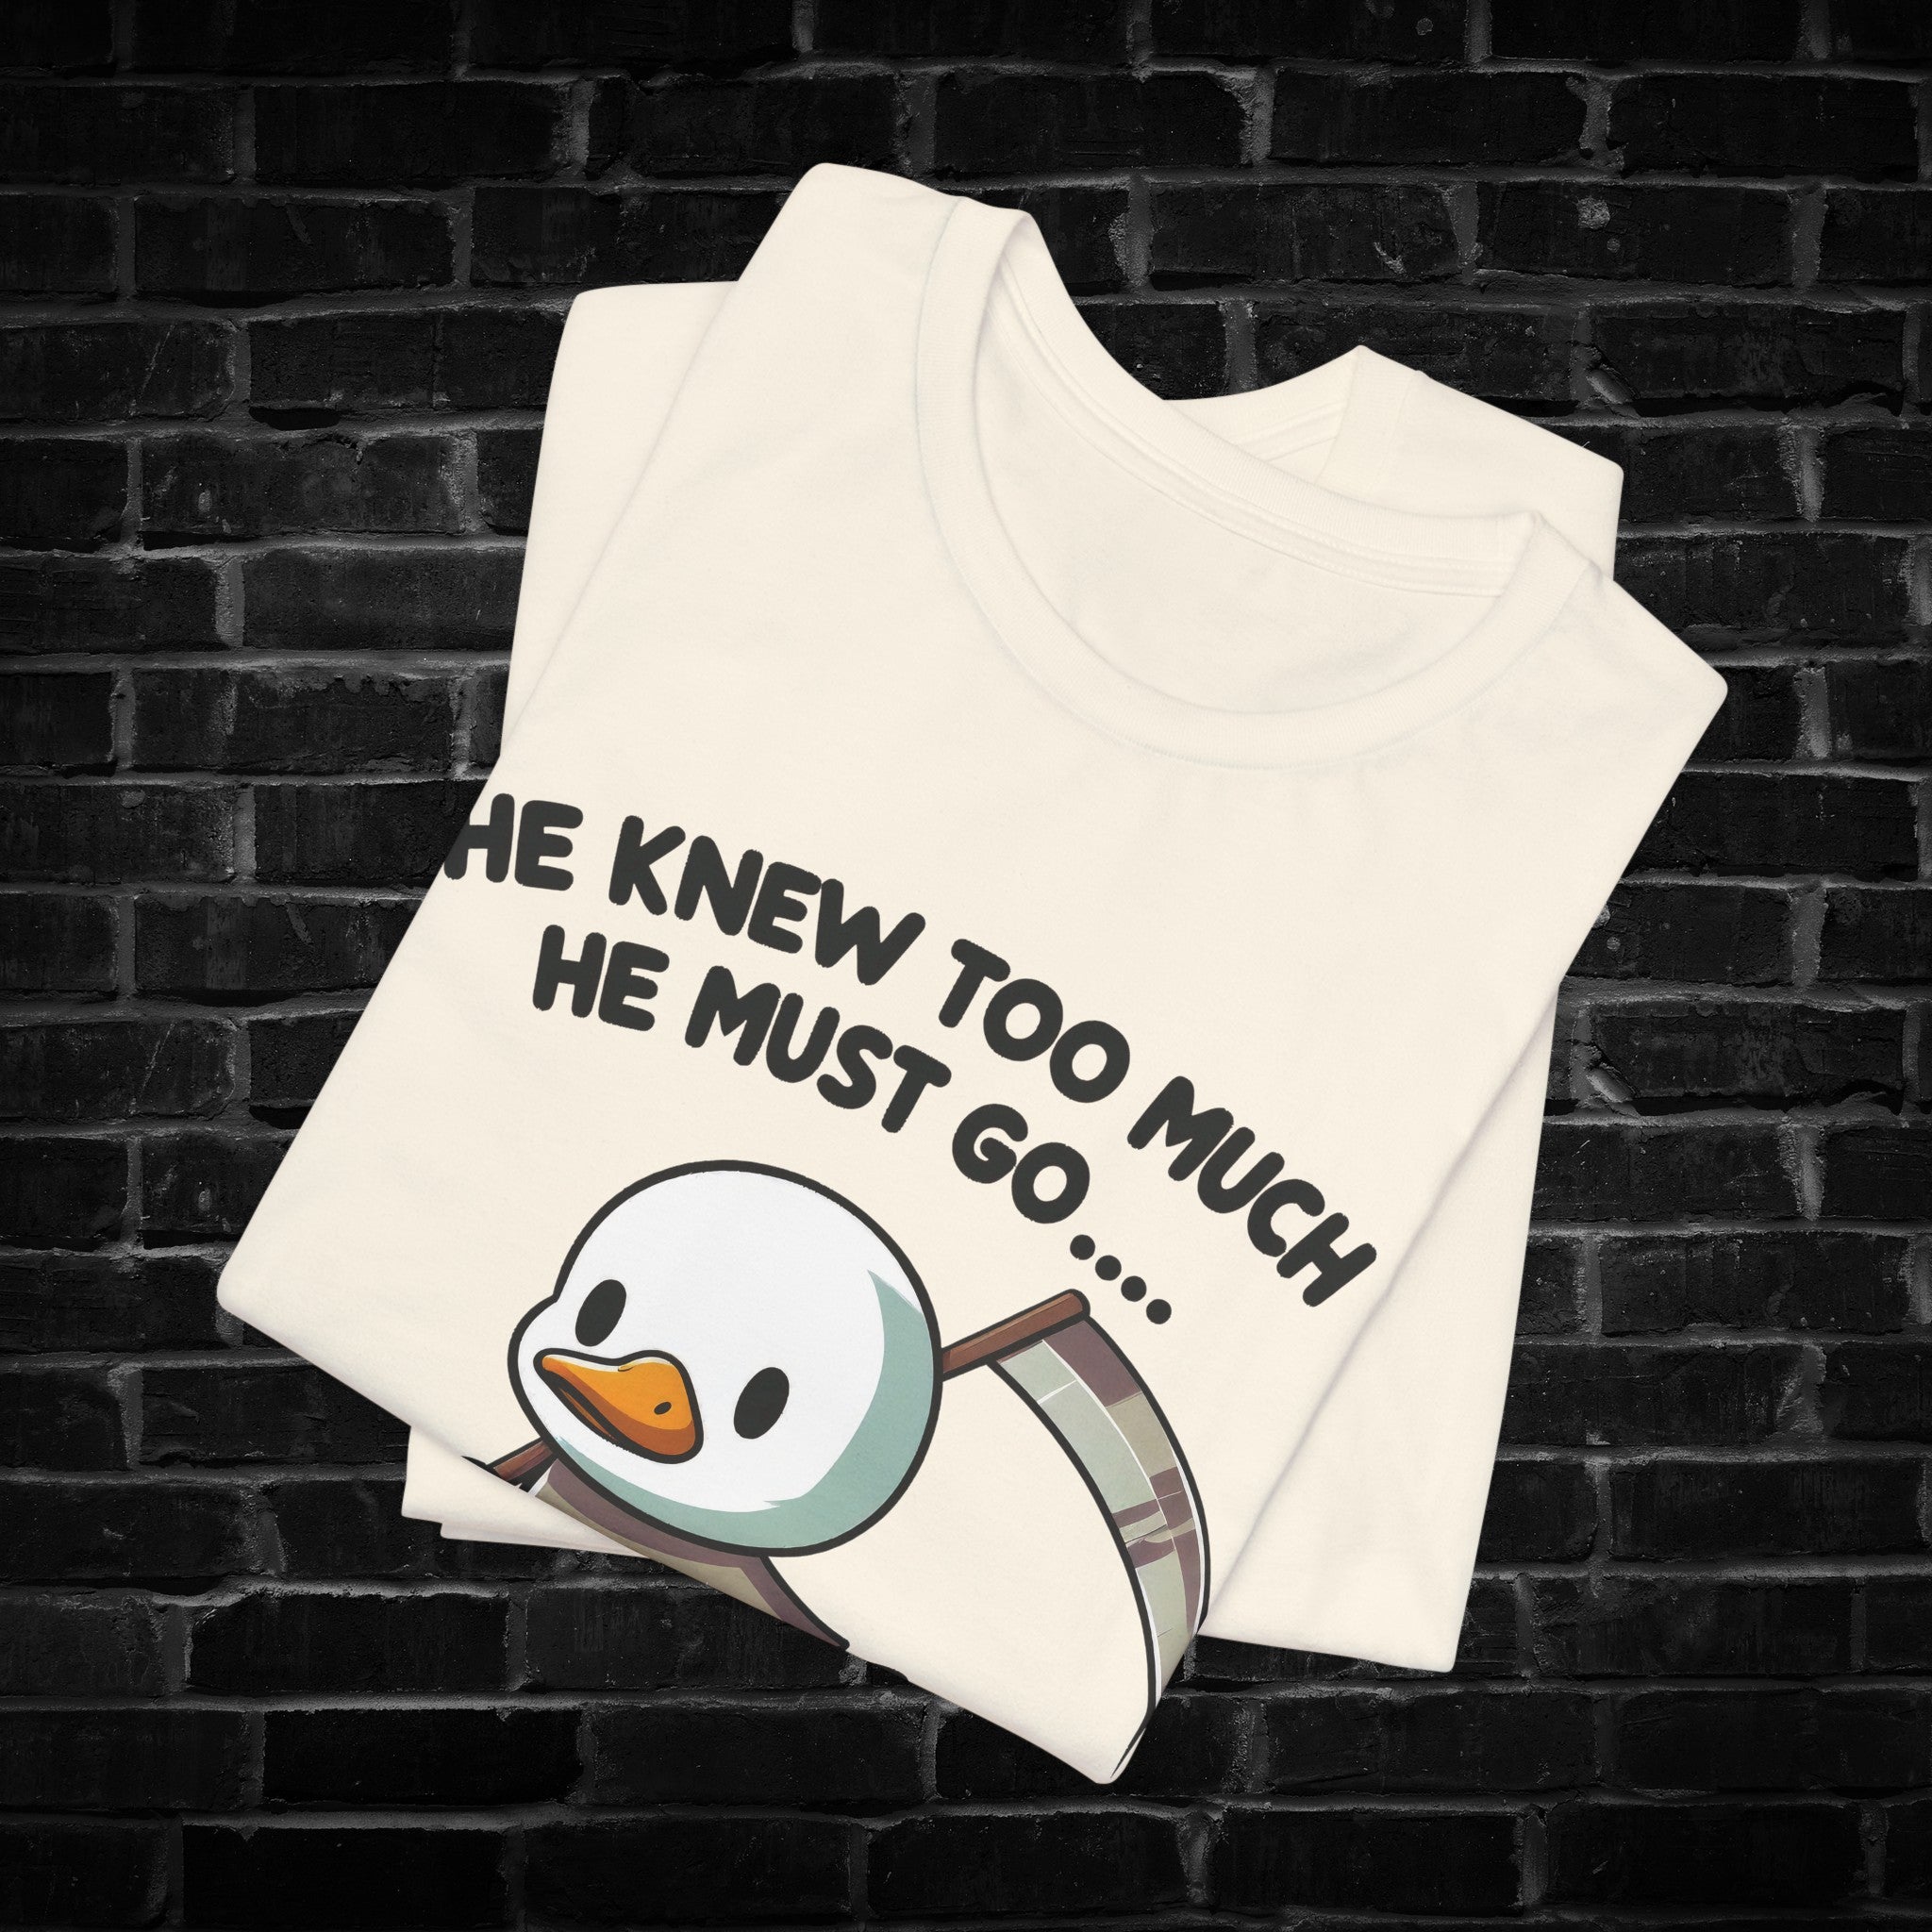 He Knew Too Much Duck Tee